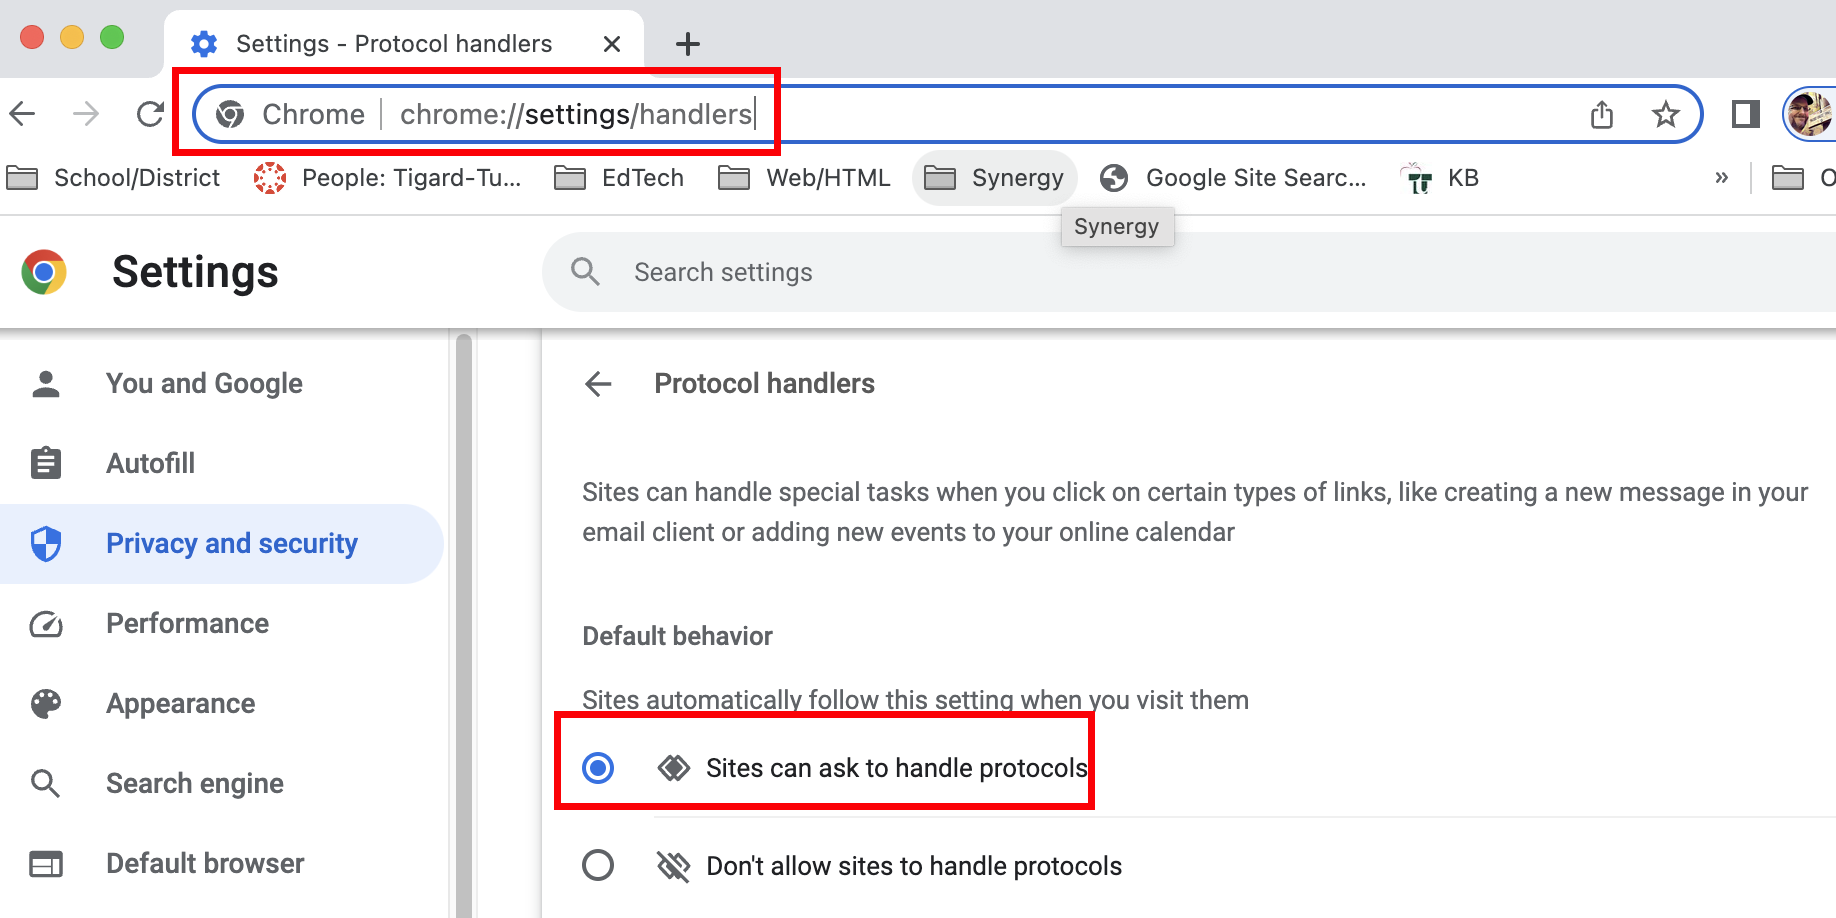 Chrome settings, protocol handlers area. button for "sites can ask to handle protocols" is selected